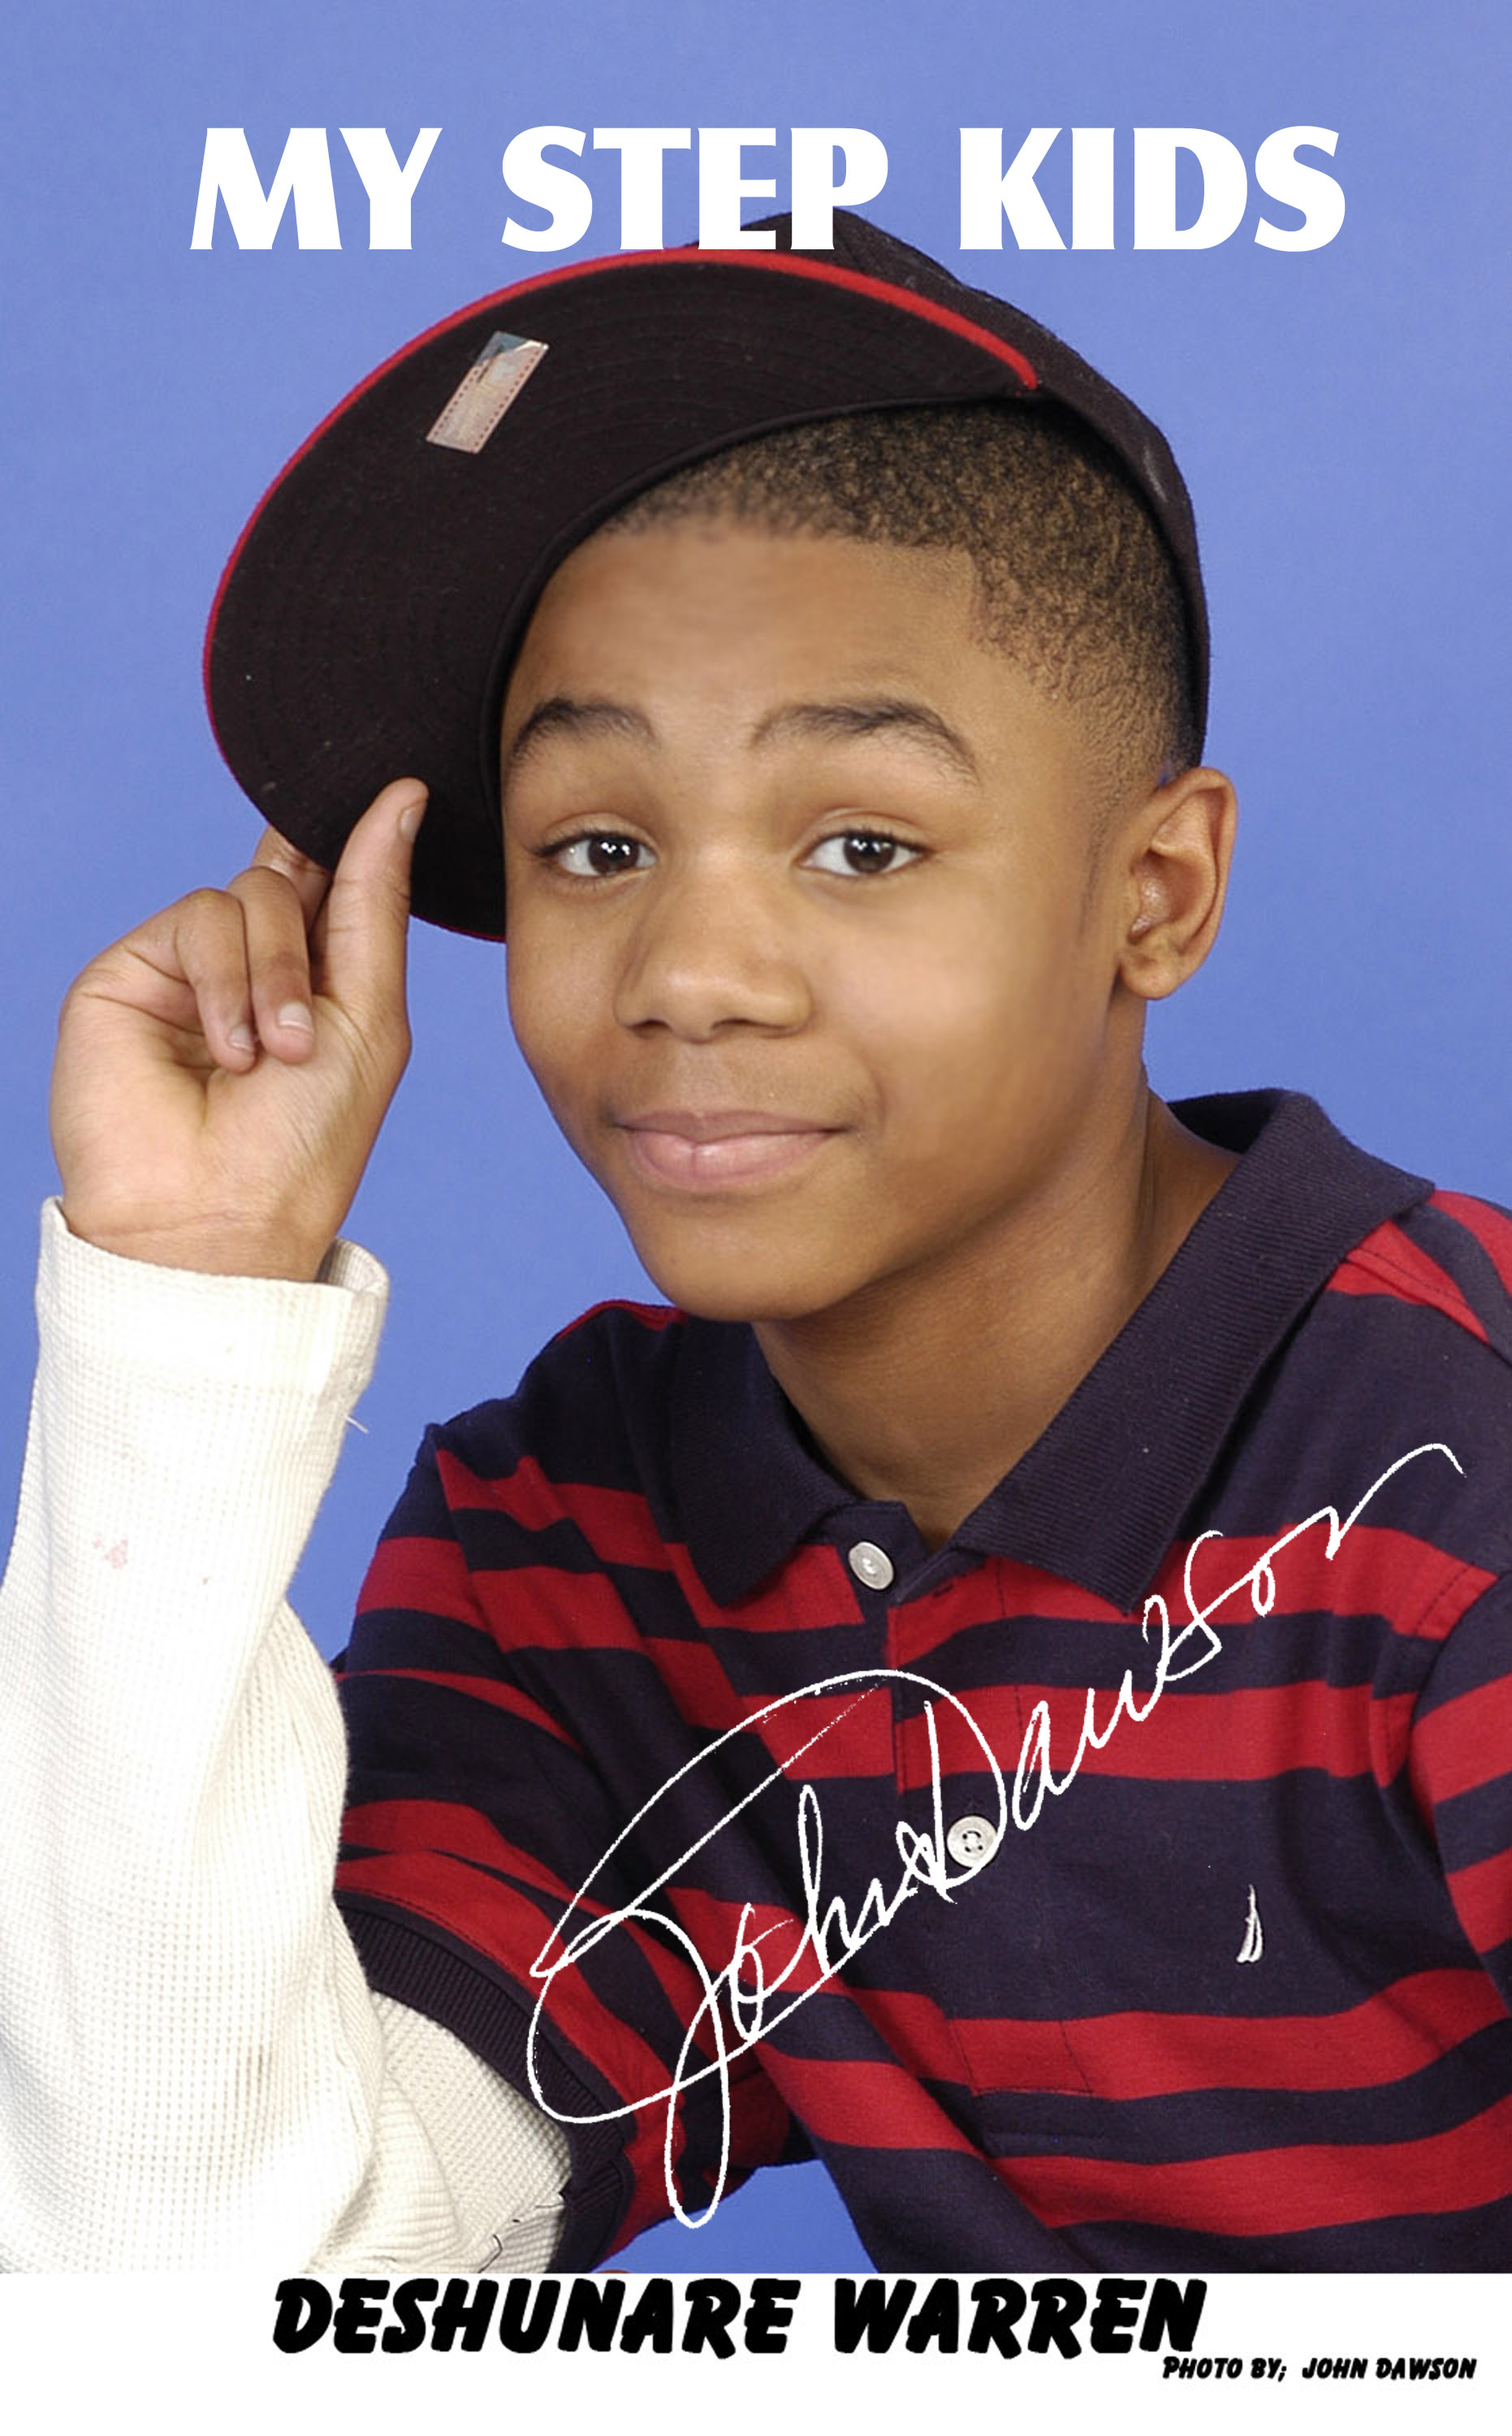 Actor DeShunare Warren Leading male child actor in MY STEP KIDS the Movie